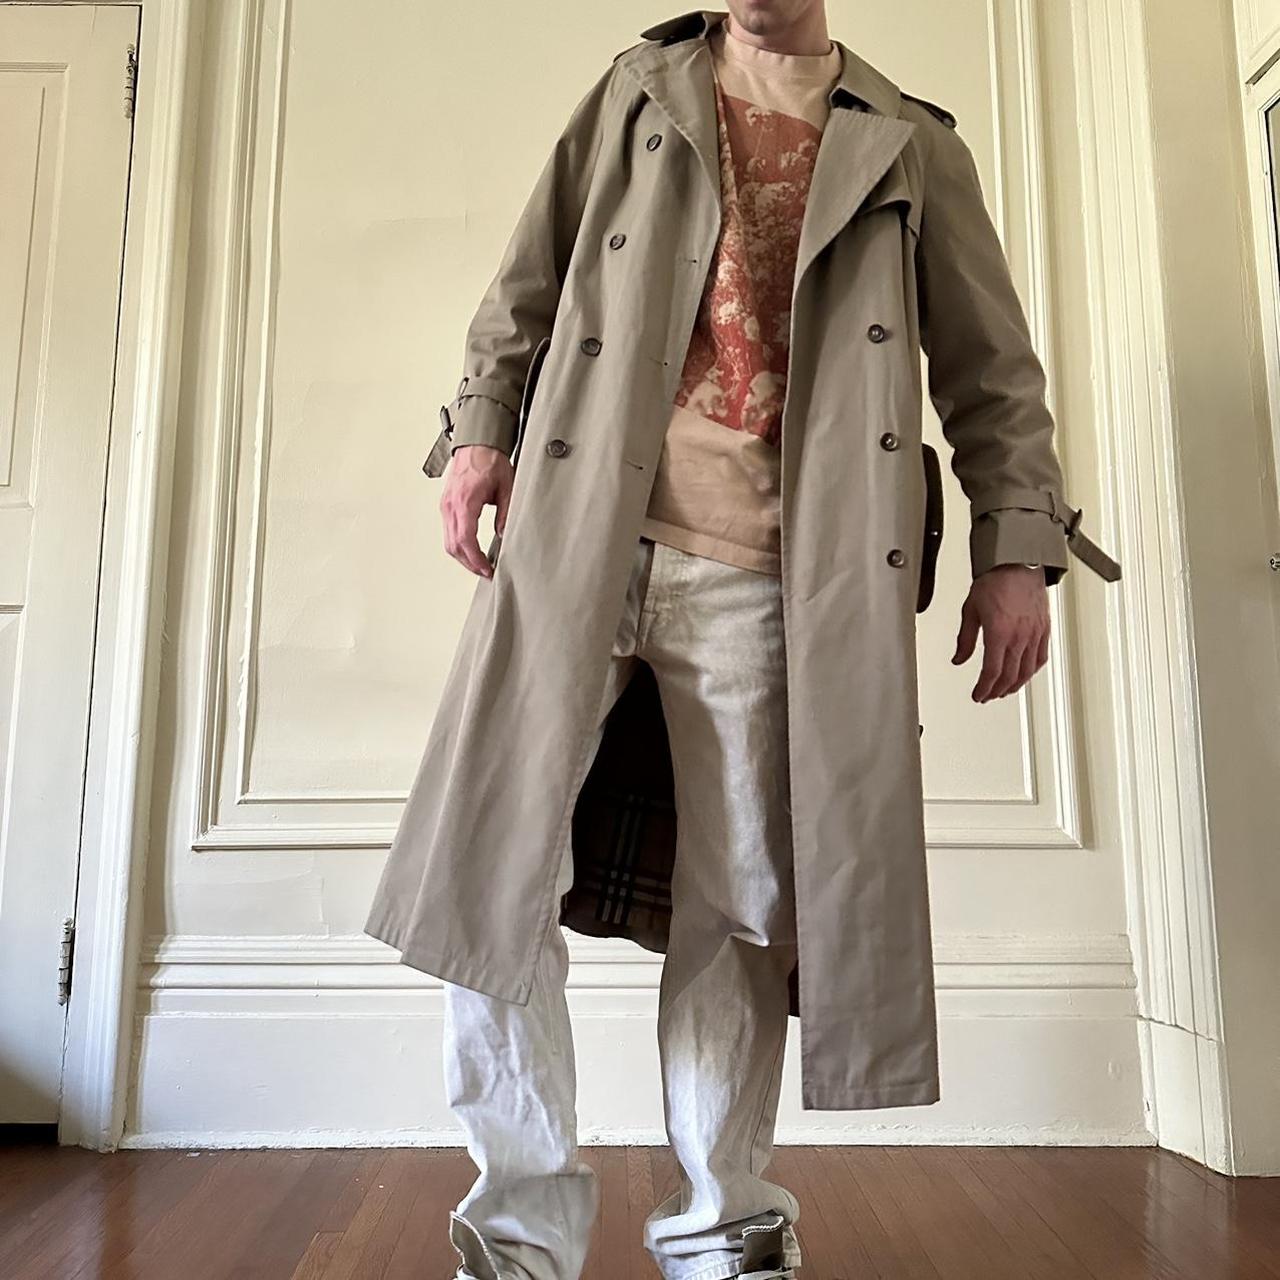 Botany 500 vintage trench coat with in tan. This... - Depop